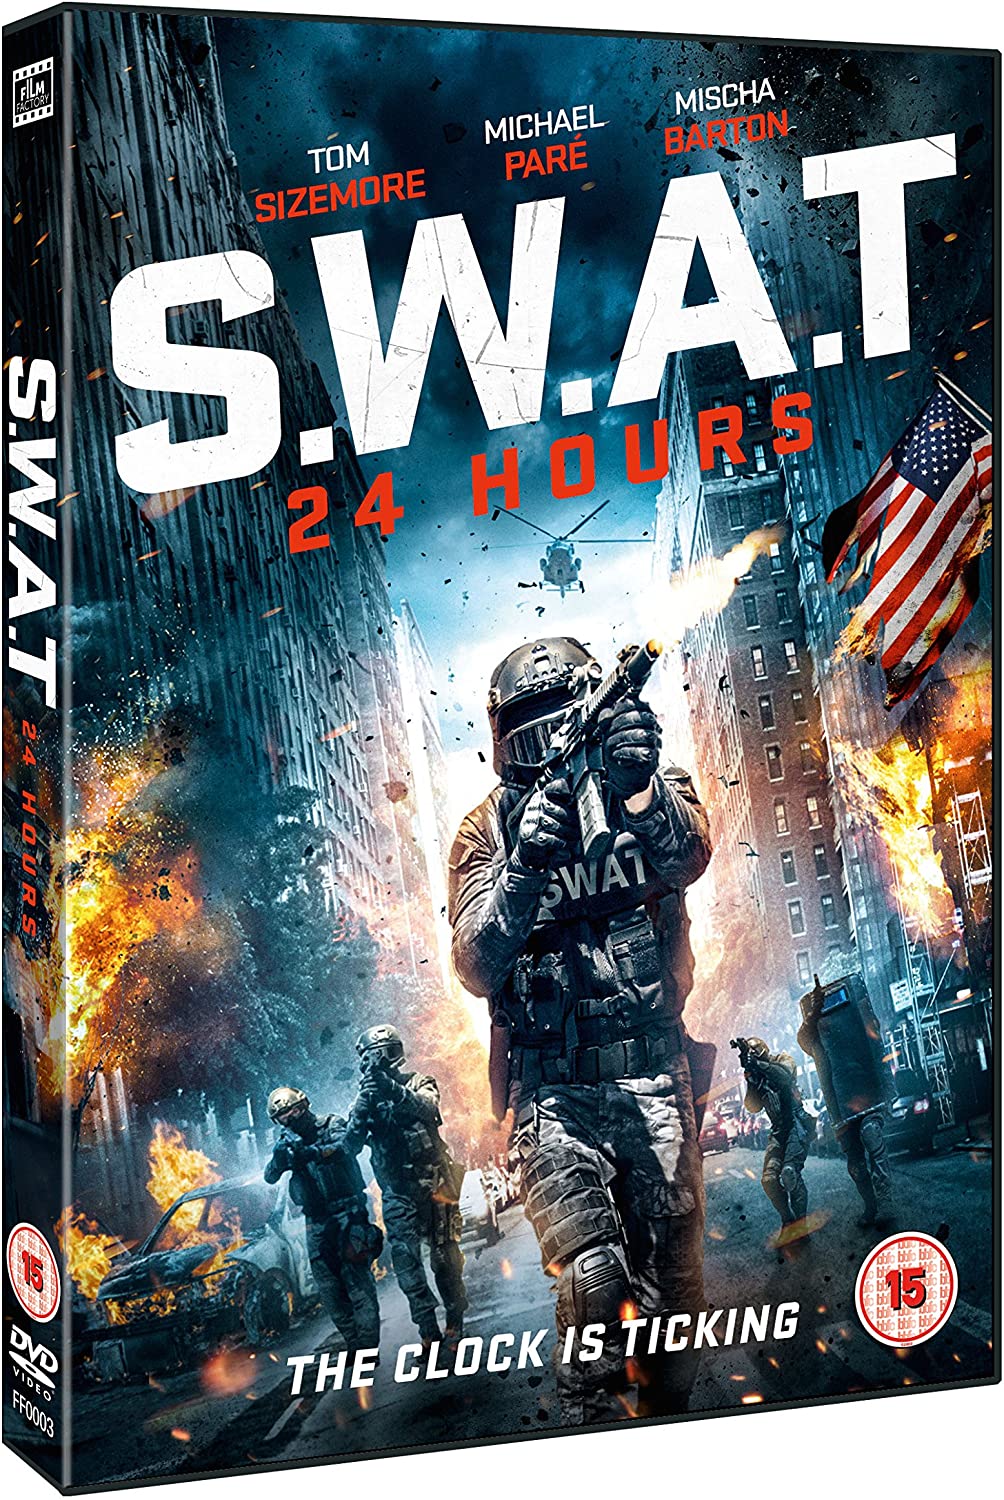 S.W.A.T 24 Hours - Action [DVD]